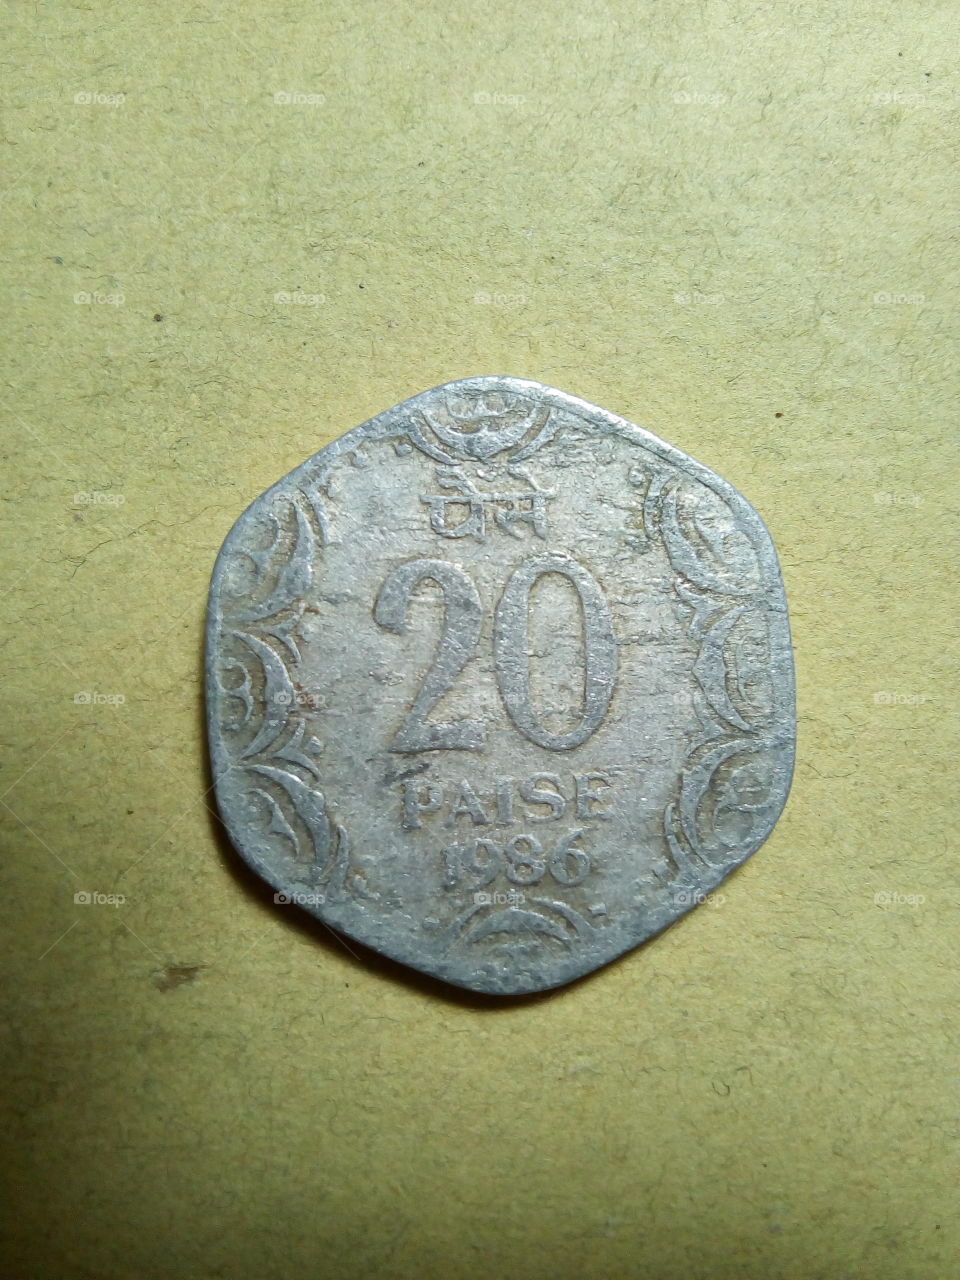 A coin of twenty paise- 1/5 share of Indian Rupee issued by Government of India in 1986.